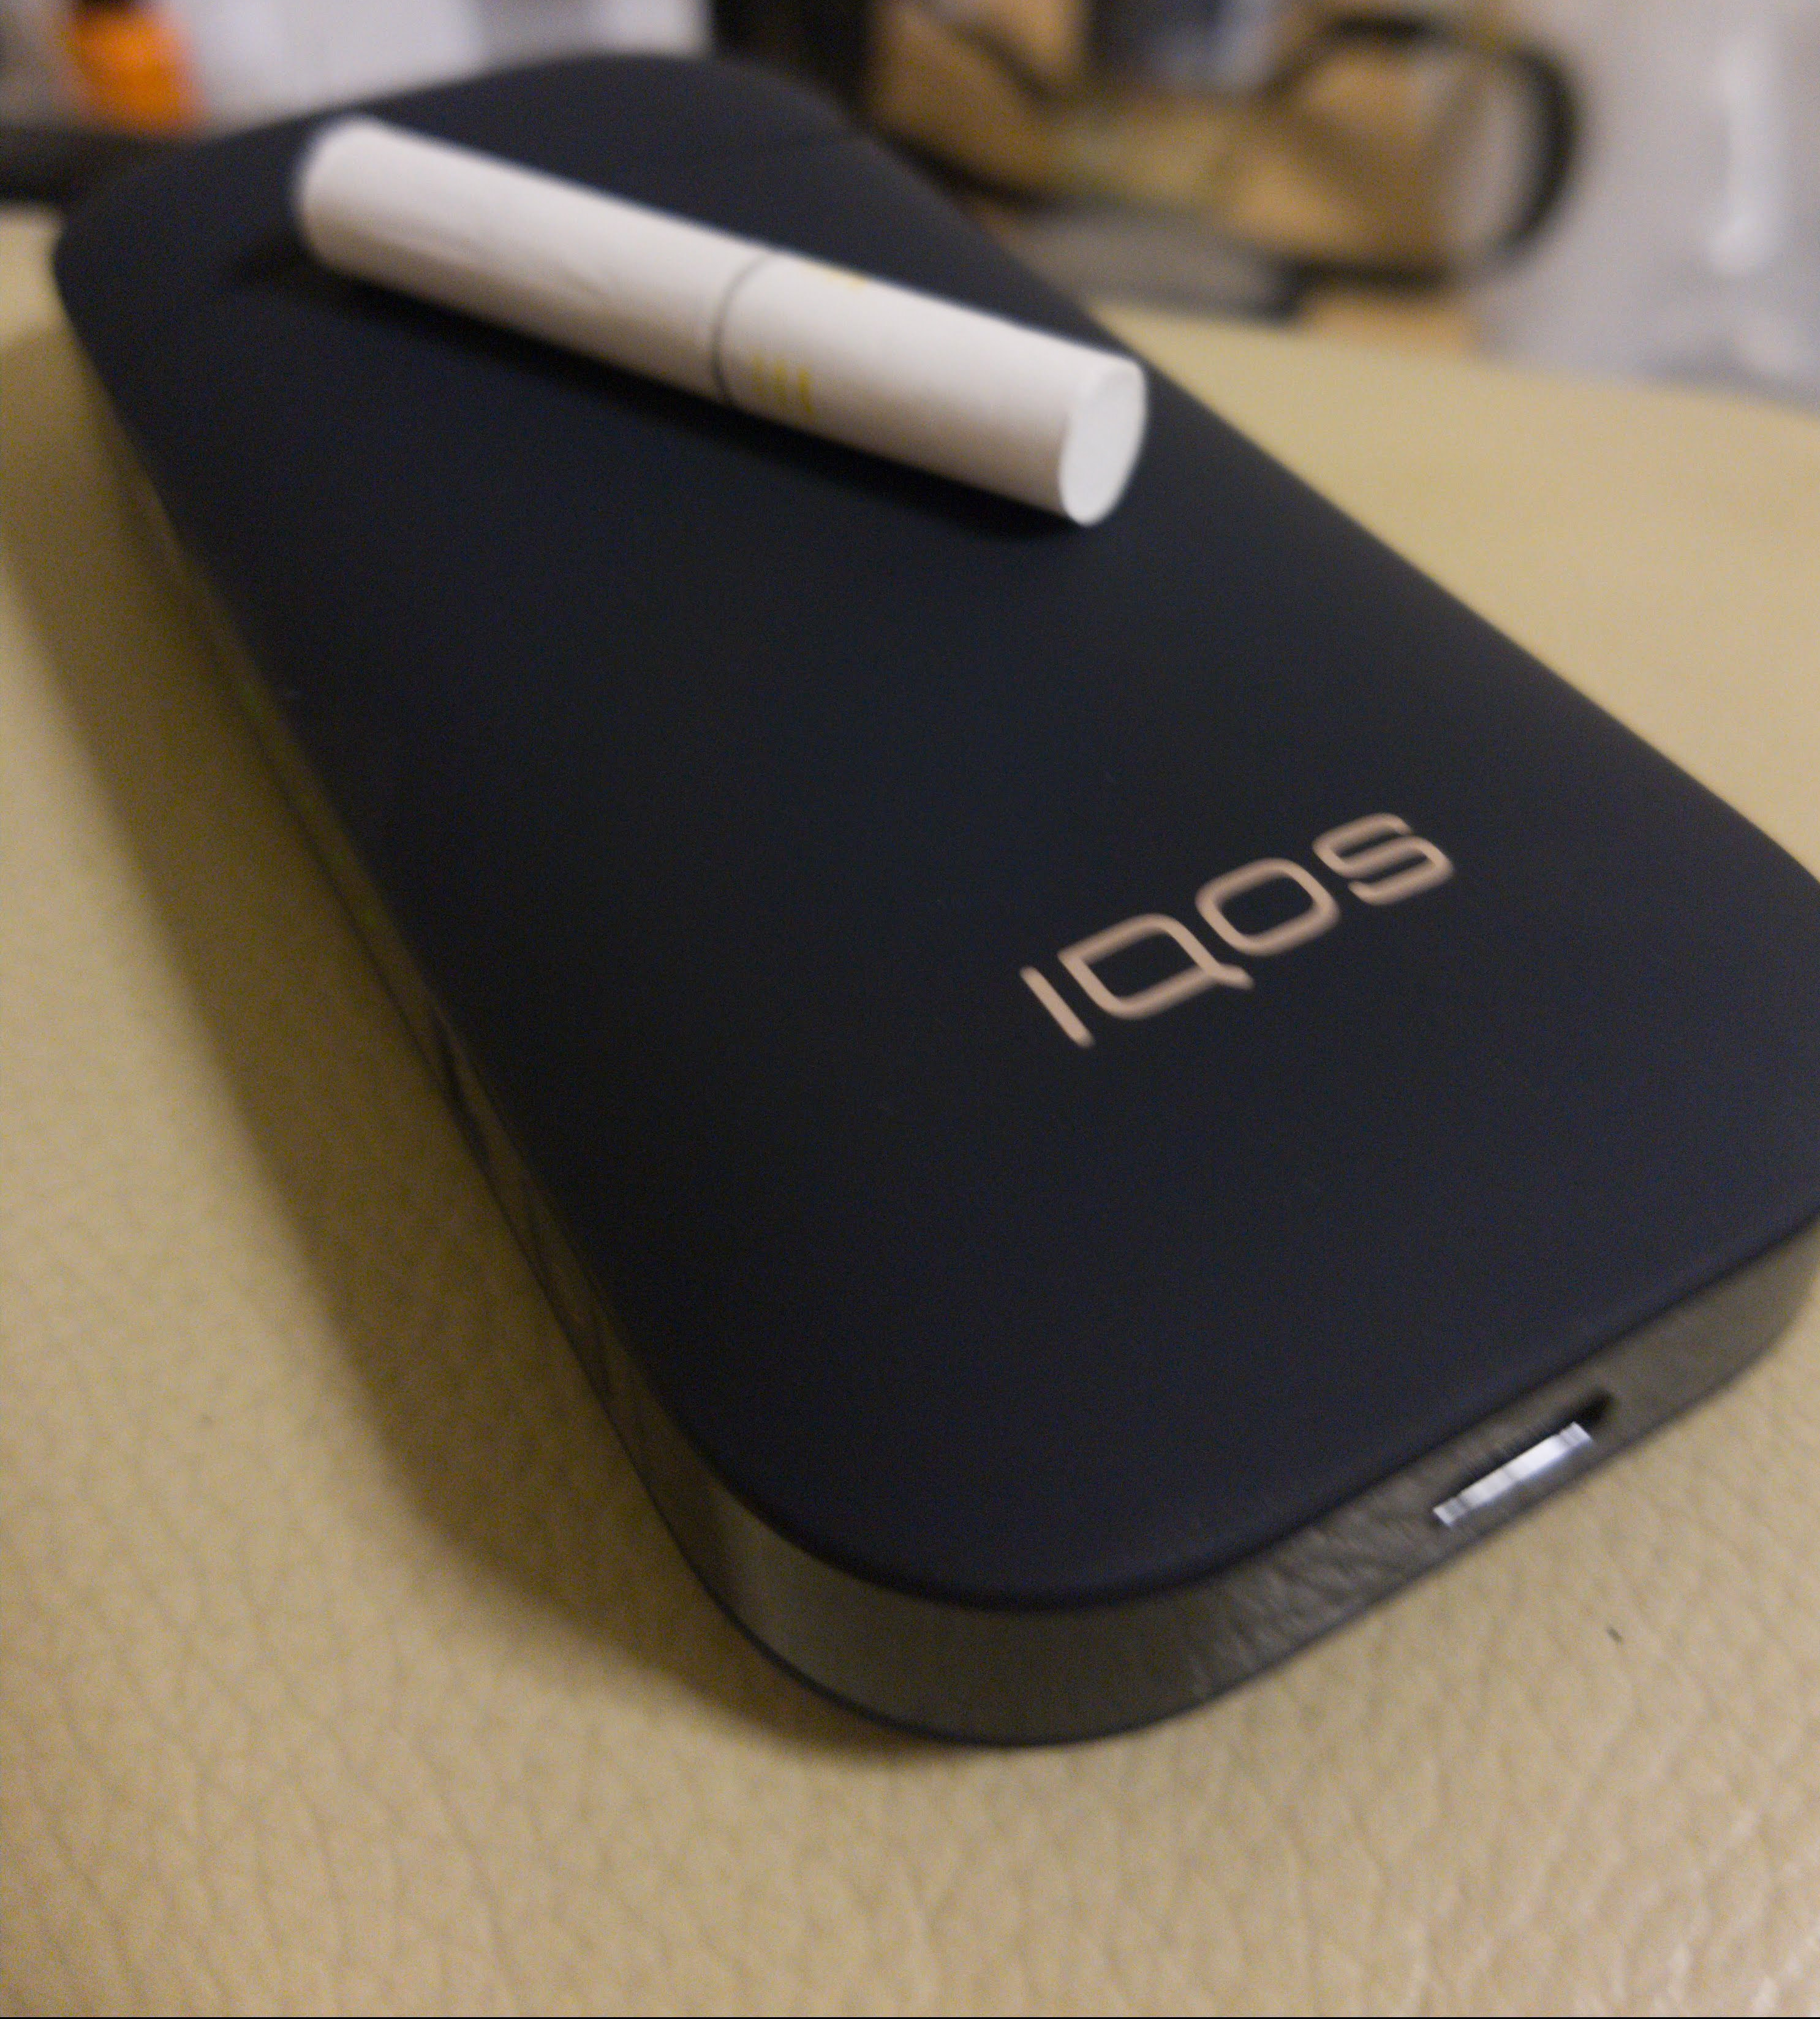 IQOS: Good Thing, or Bad?